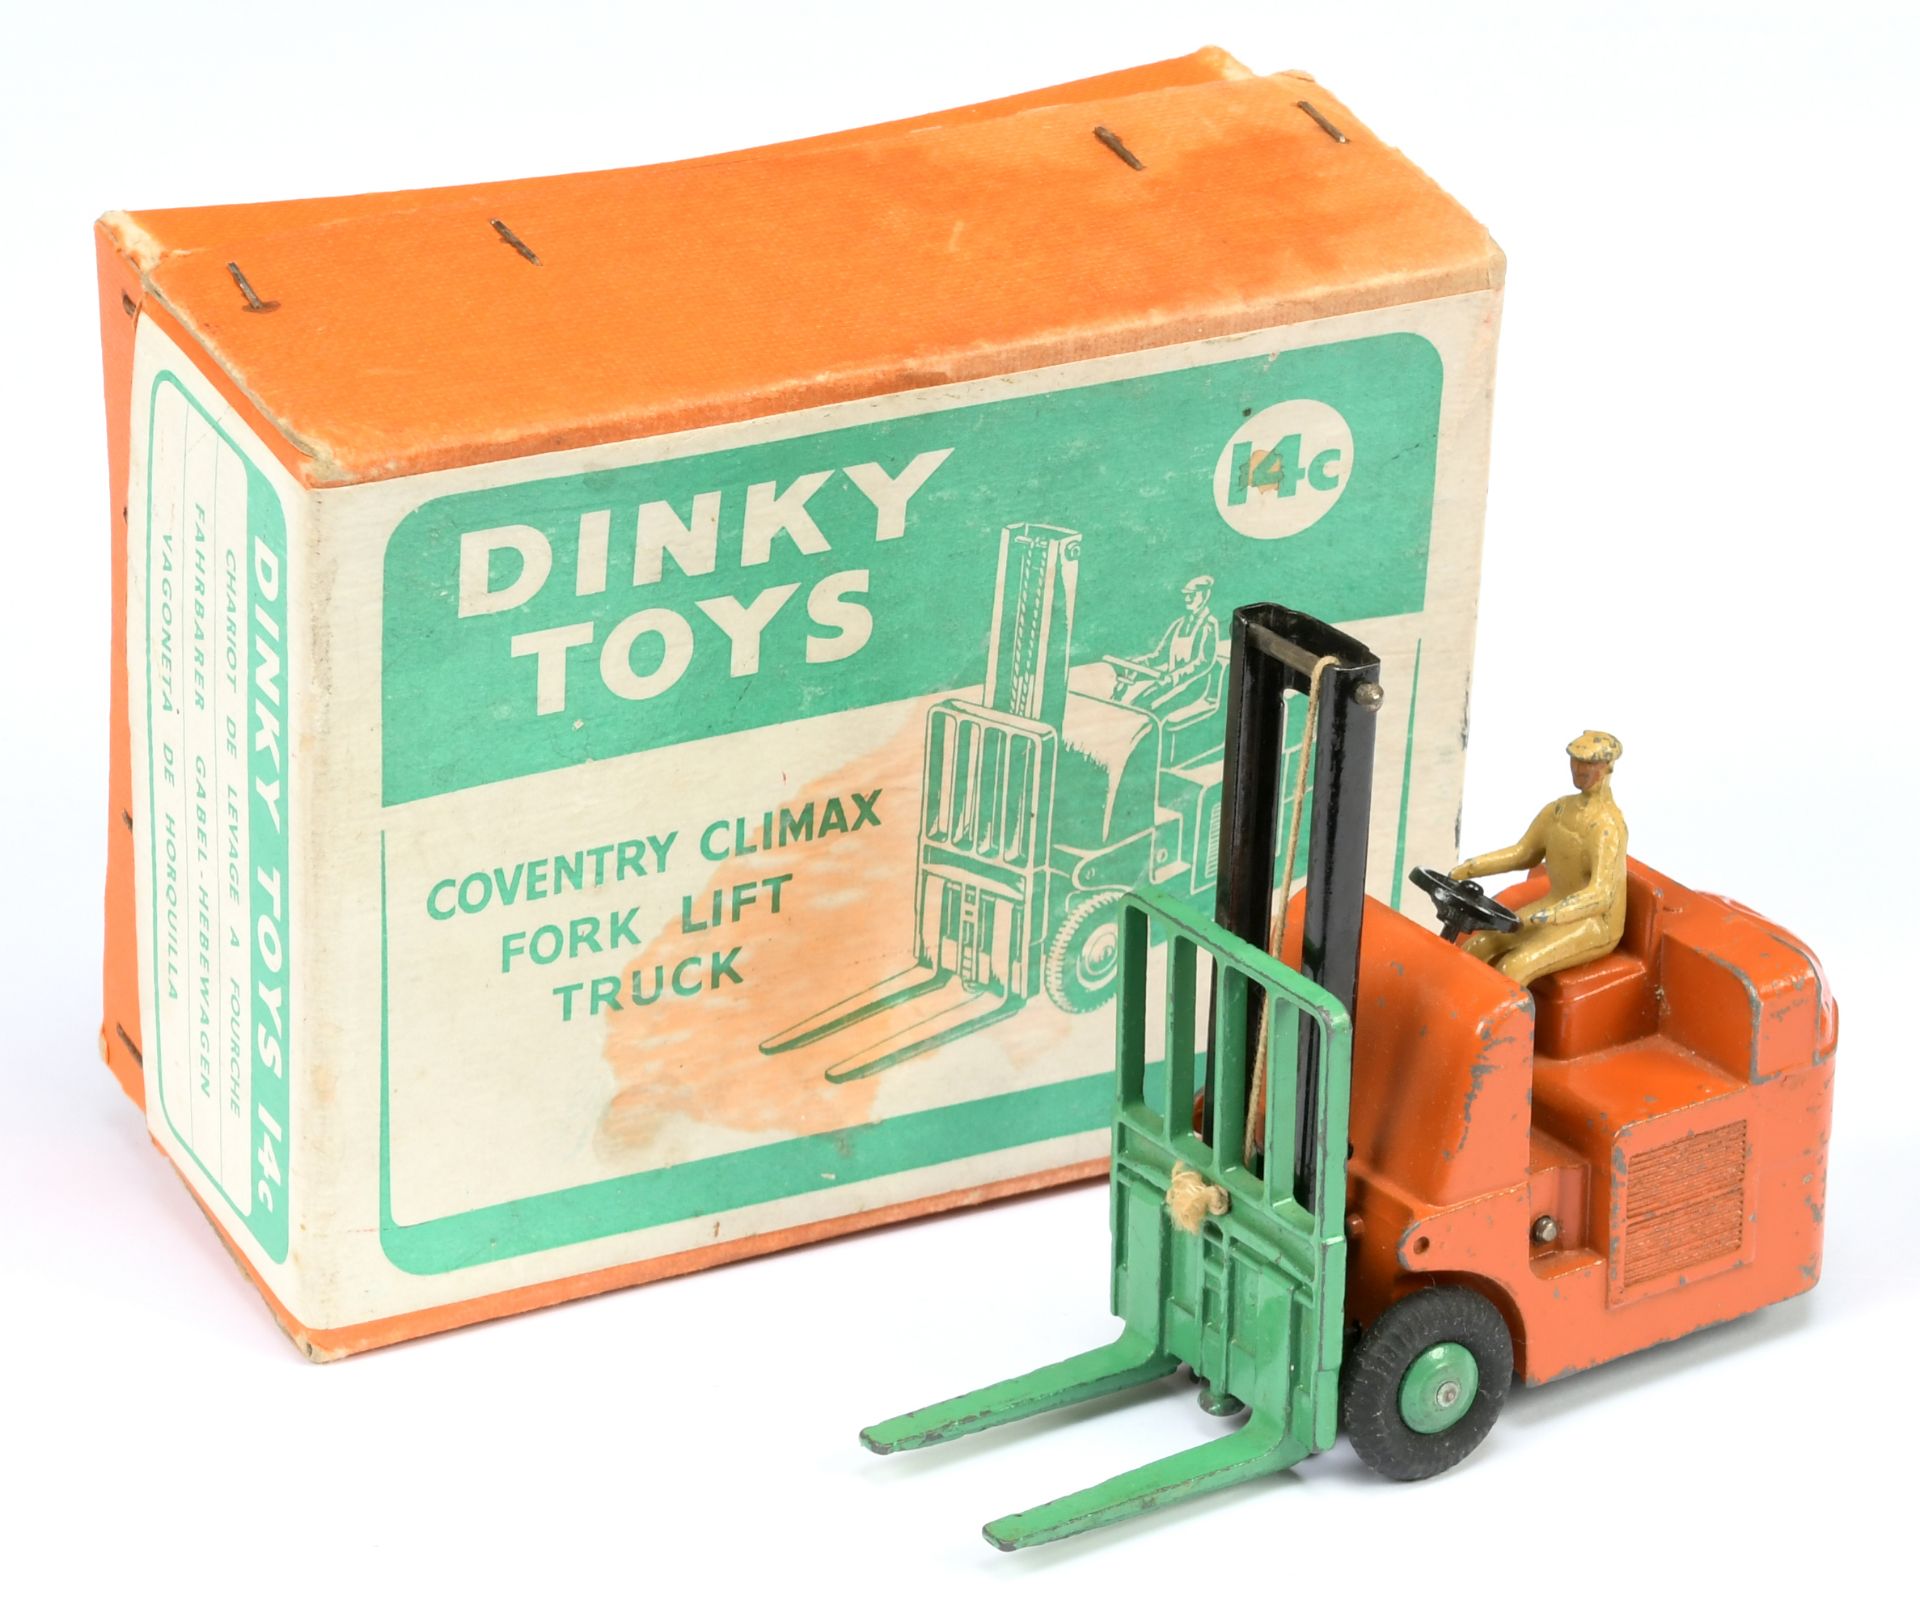 Dinky Toys 14C Coventry Climax Fork Lift Truck - Burnt orange body, black mast, mid-green forks a...